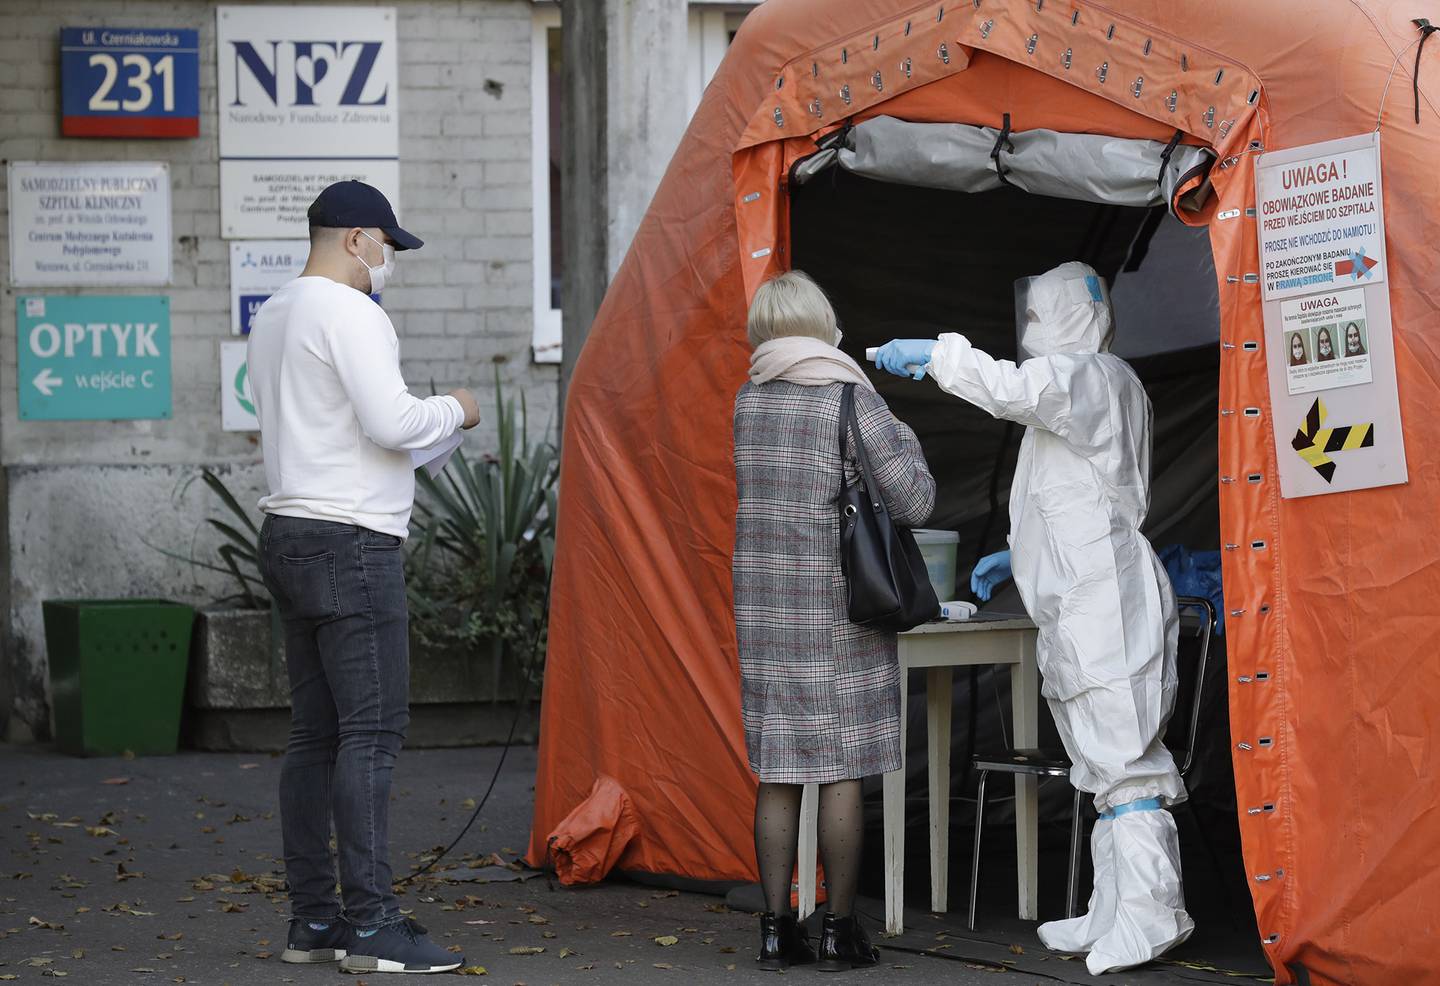 People arrive to be tested for COVID-19 in Warsaw, Poland, Thursday, Oct. 22, 2020.